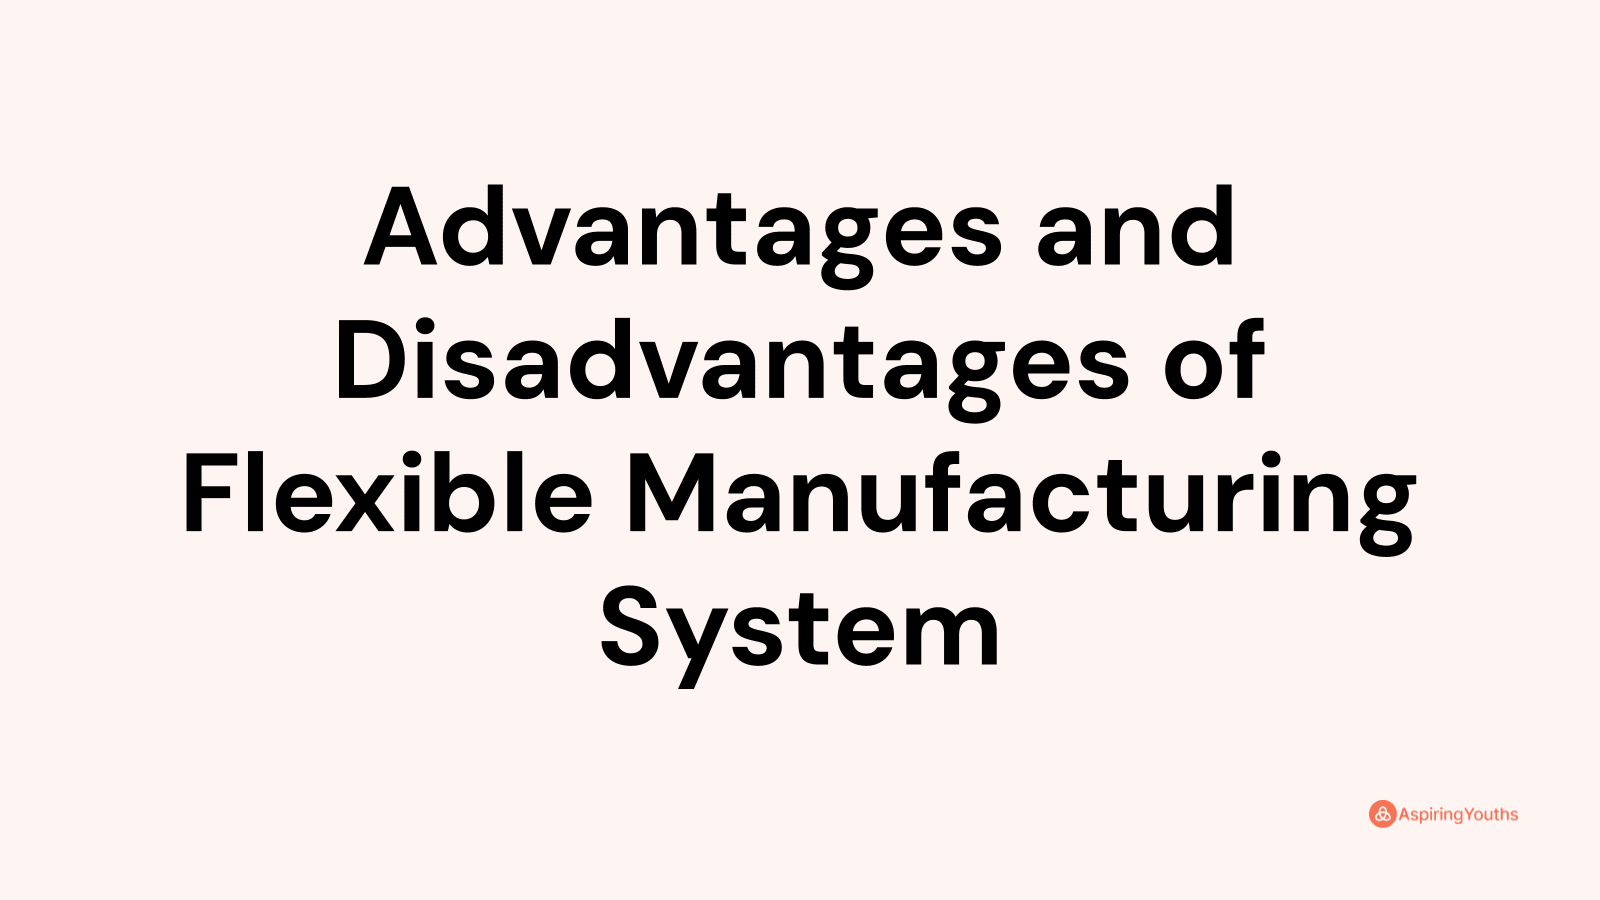 Advantages and disadvantages of Flexible Manufacturing System